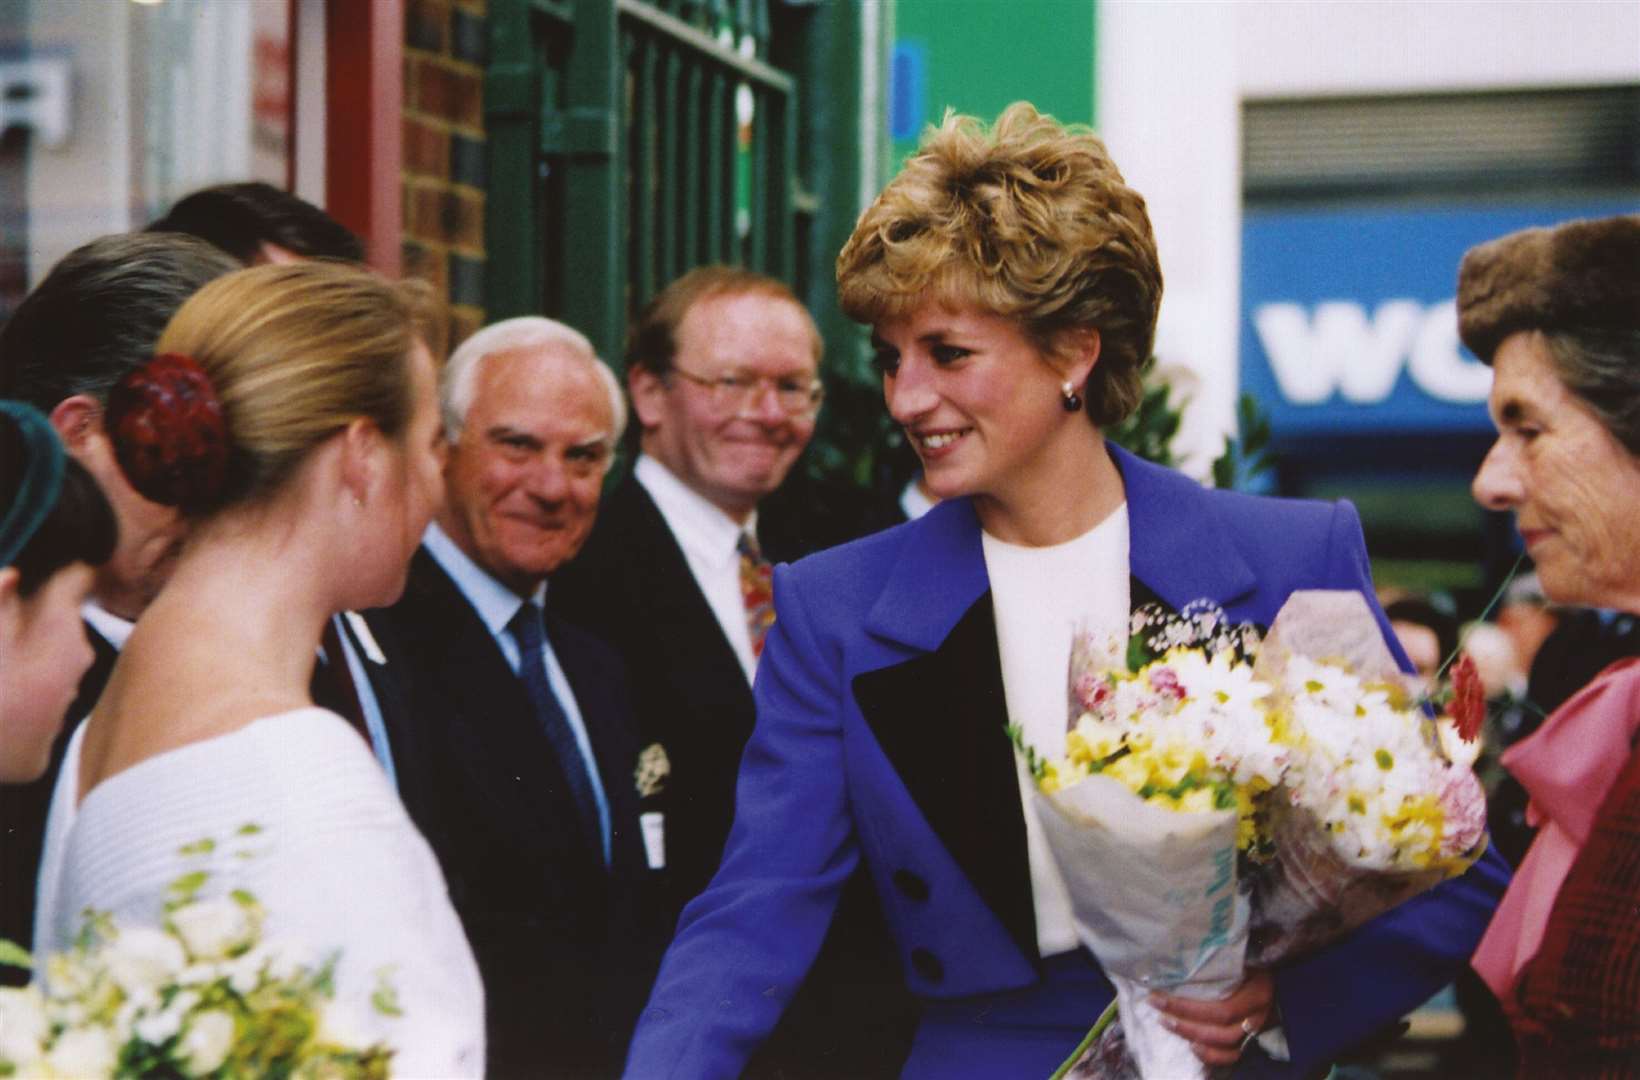 Princess Diana is welcomed to Tunbridge Wells with bouquets of flowers